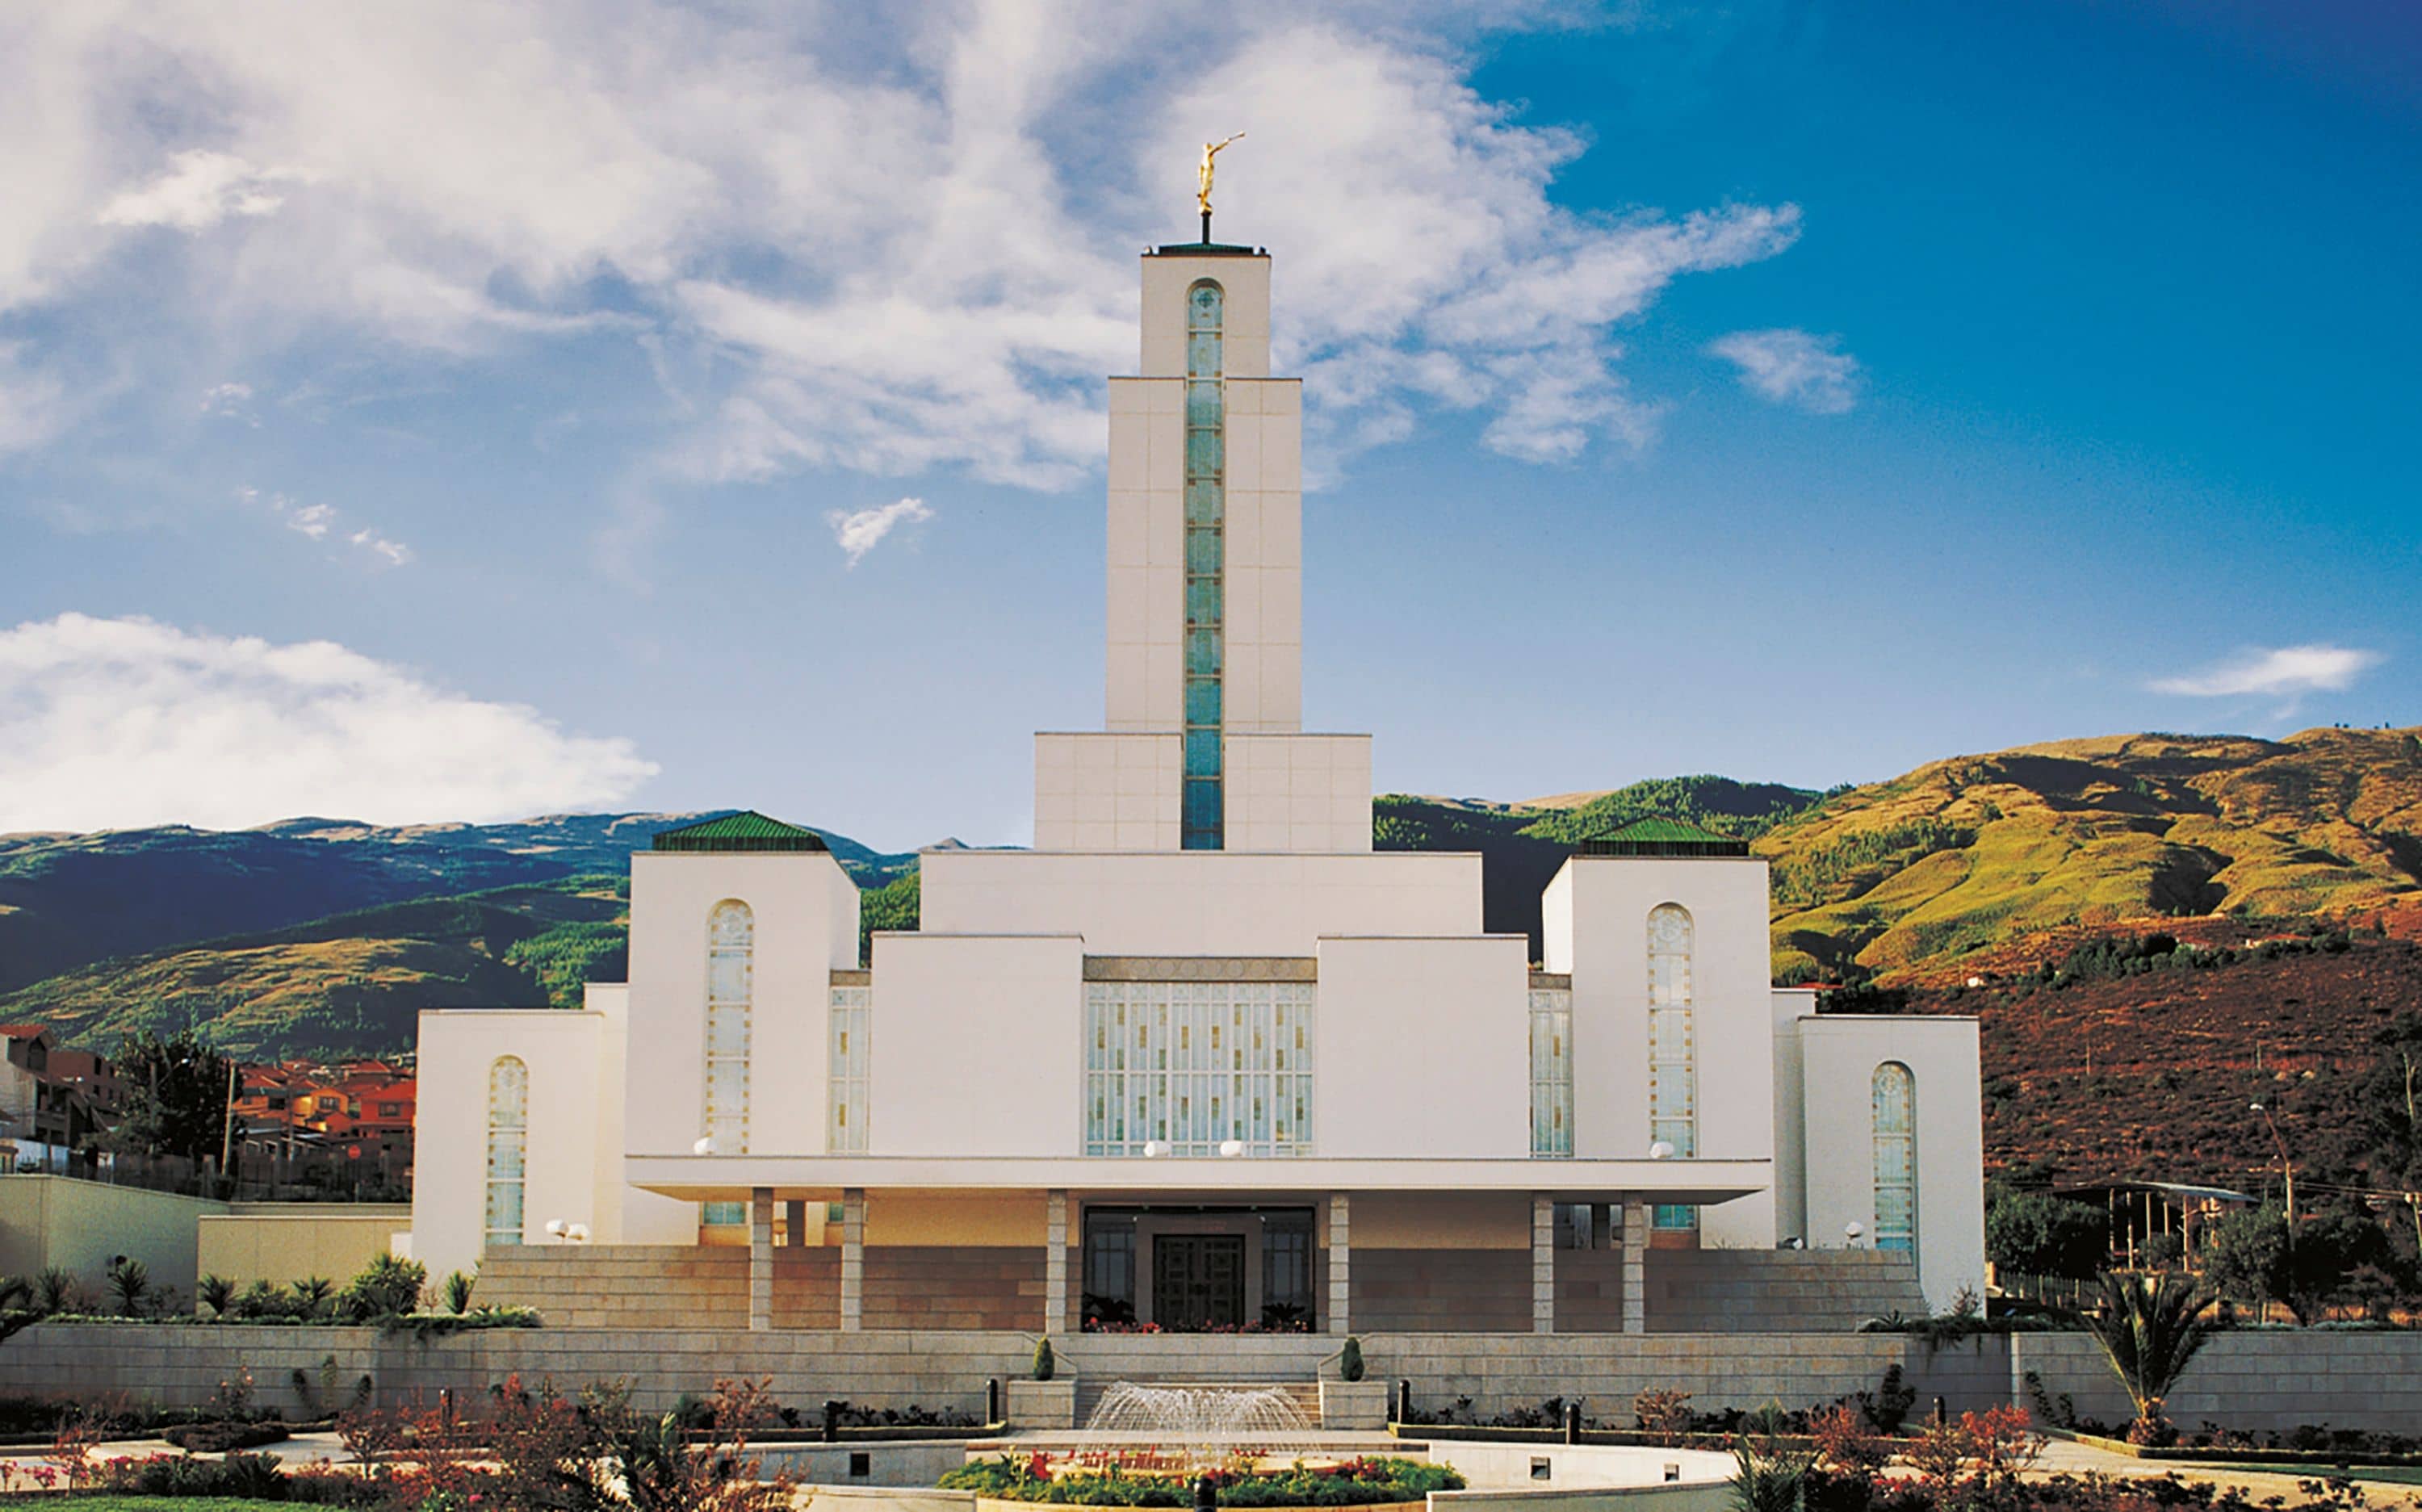 The Cochabamba Bolivia Temple, a white building with a central tower topped by a golden statue of an angel blowing a trumpet.